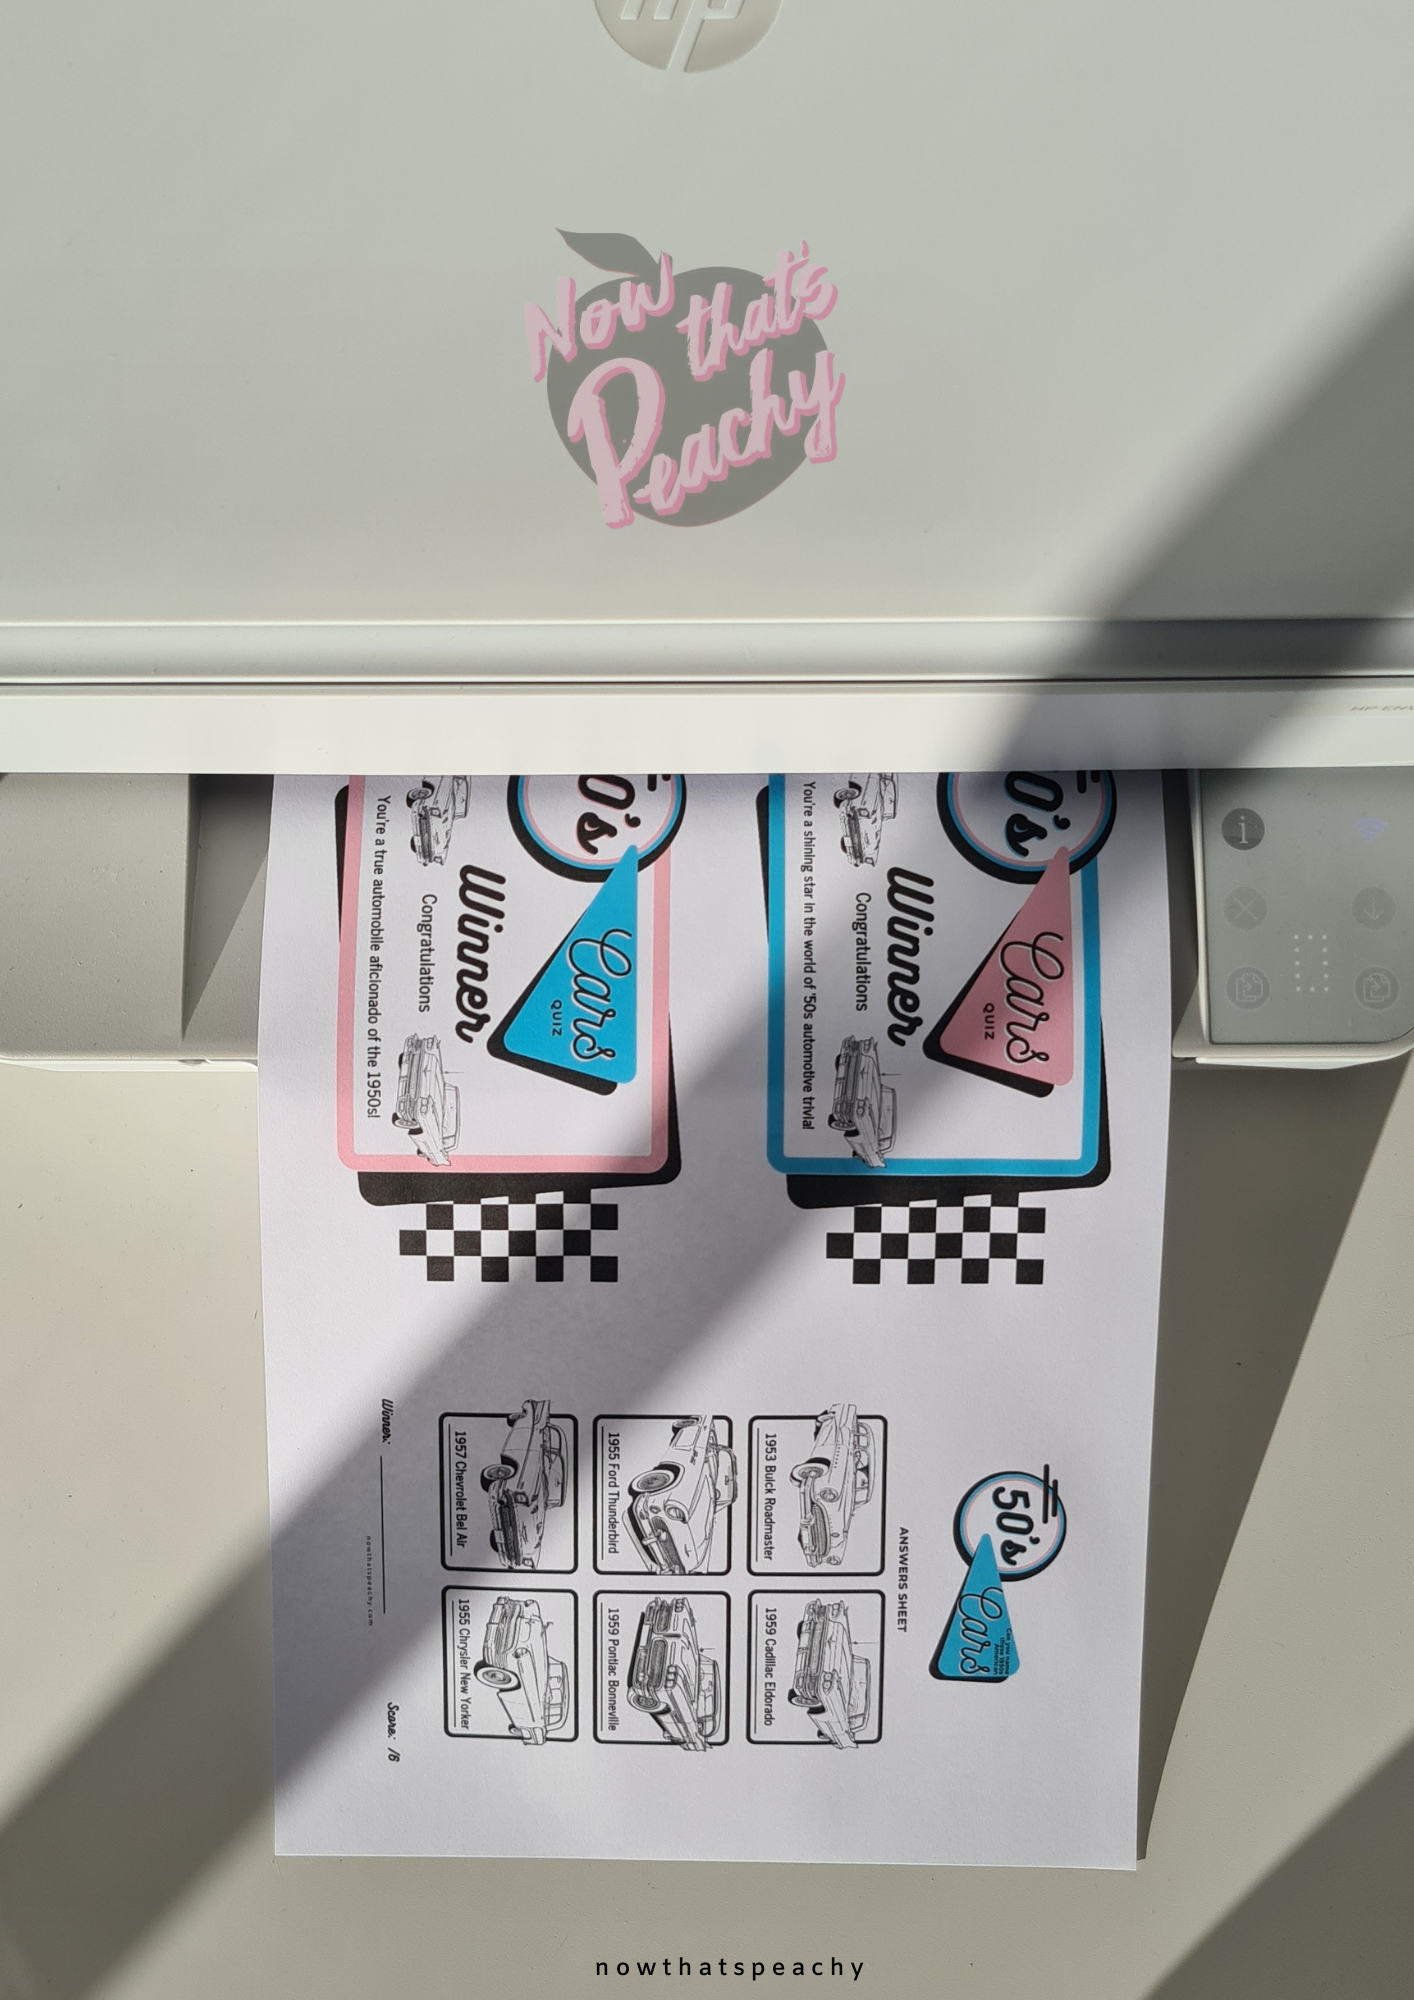 1950's Kids of the Day Trivia Quiz Game Party PRINTABLE, for Rock'n'roll Sock Hop Retro Birthday fifties parties. This delightful game is designed to evoke nostalgia and memories of your childhood years, making it perfect for adults who want to relive the magic of being a kid in the '50s.  With 10 carefully crafted questions, our trivia quiz covers a wide range of topics that were popular among kids during that era. From beloved TV shows and iconic toys to memorable movies